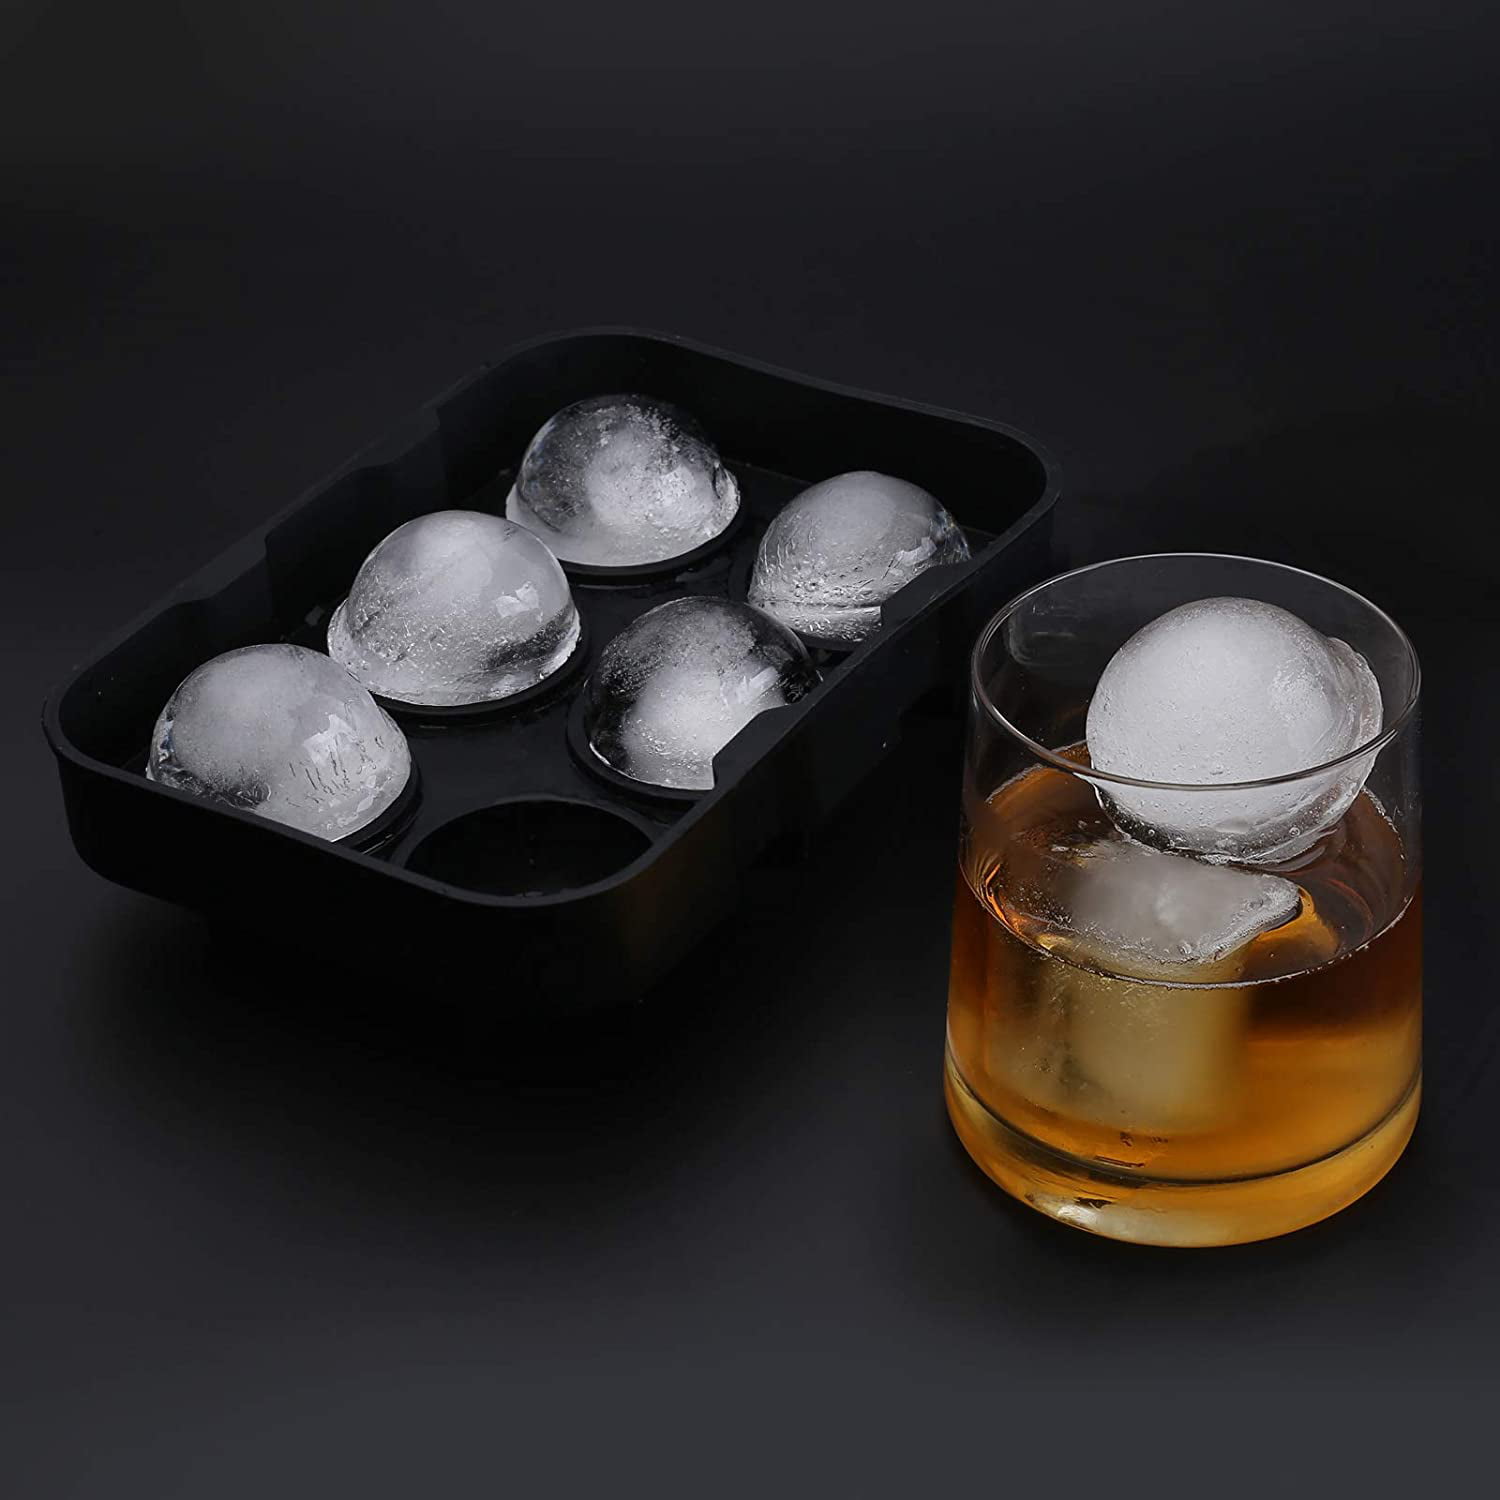 Bourbon Ice Cube Trays Giant Square 2.2 Whiskey Molds 6 cubes tray - –